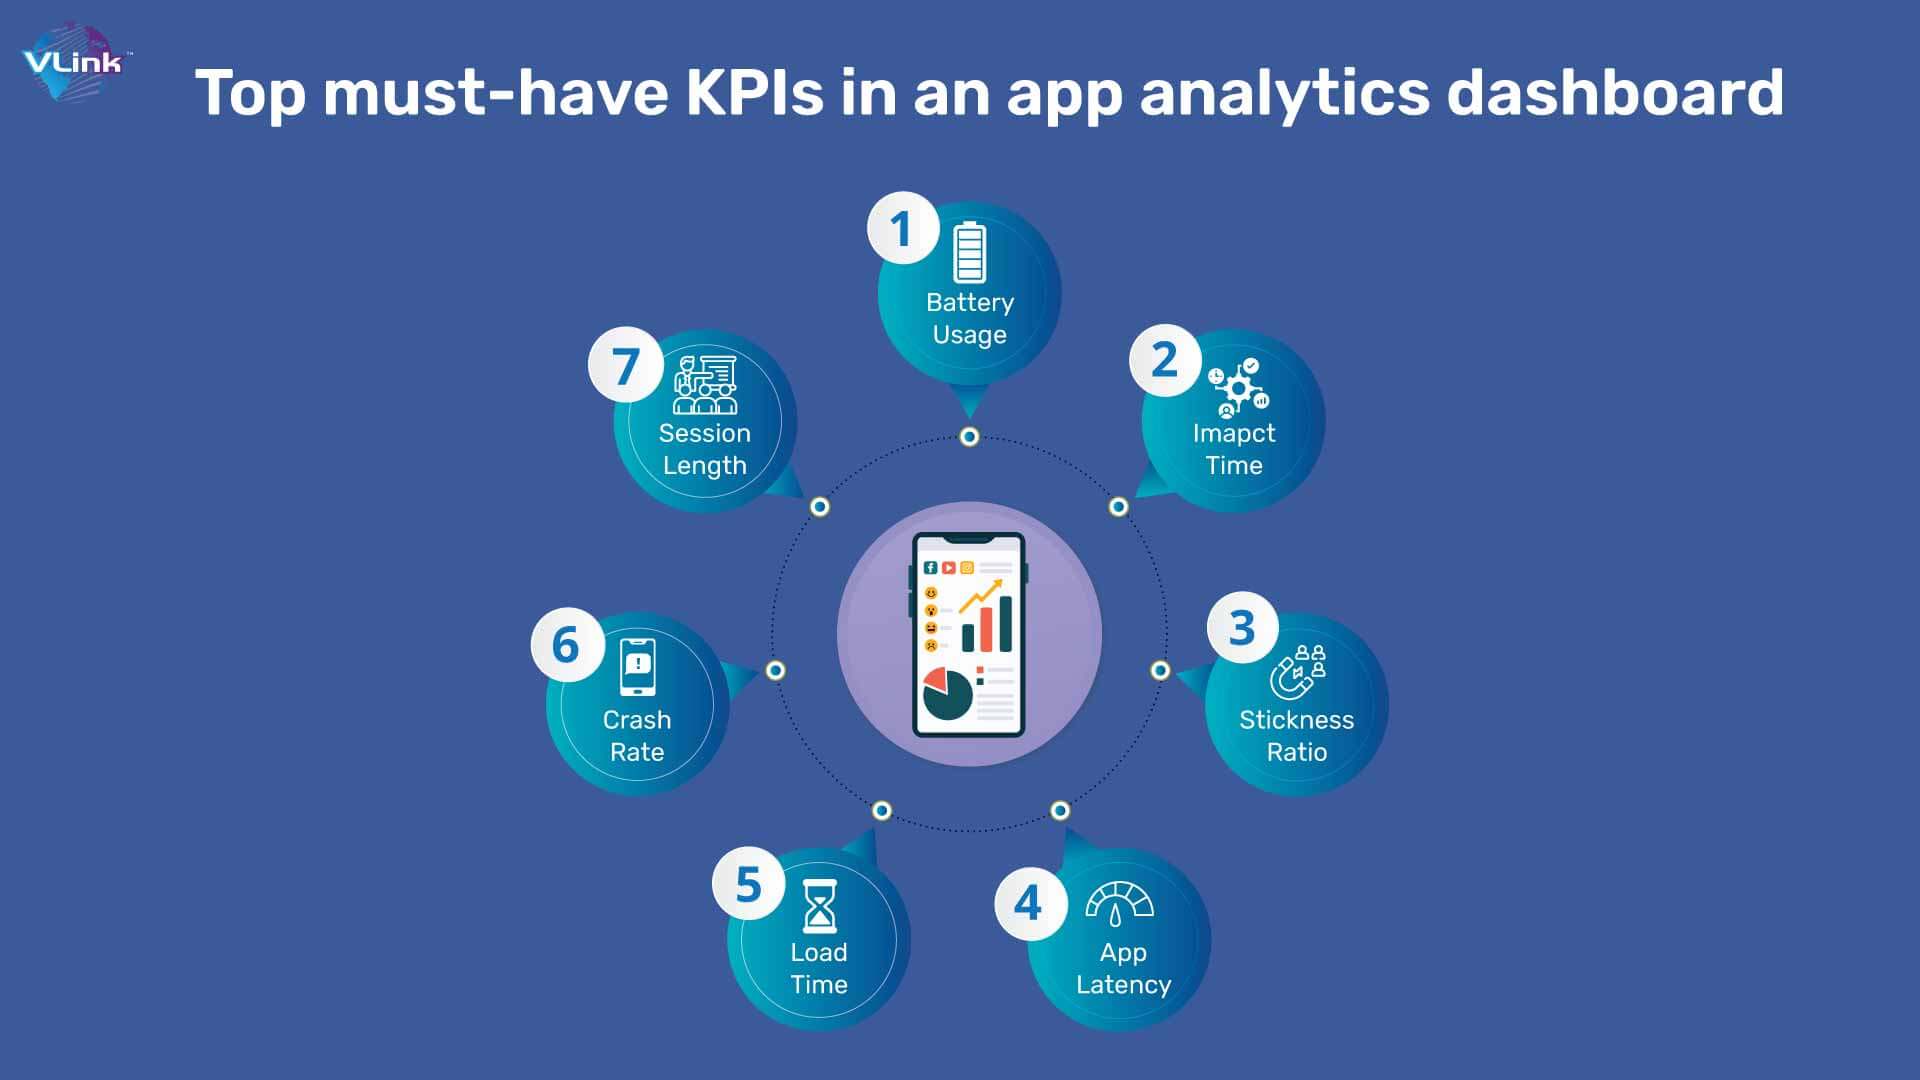 Top must-have KPIs in an app analytics dashboard